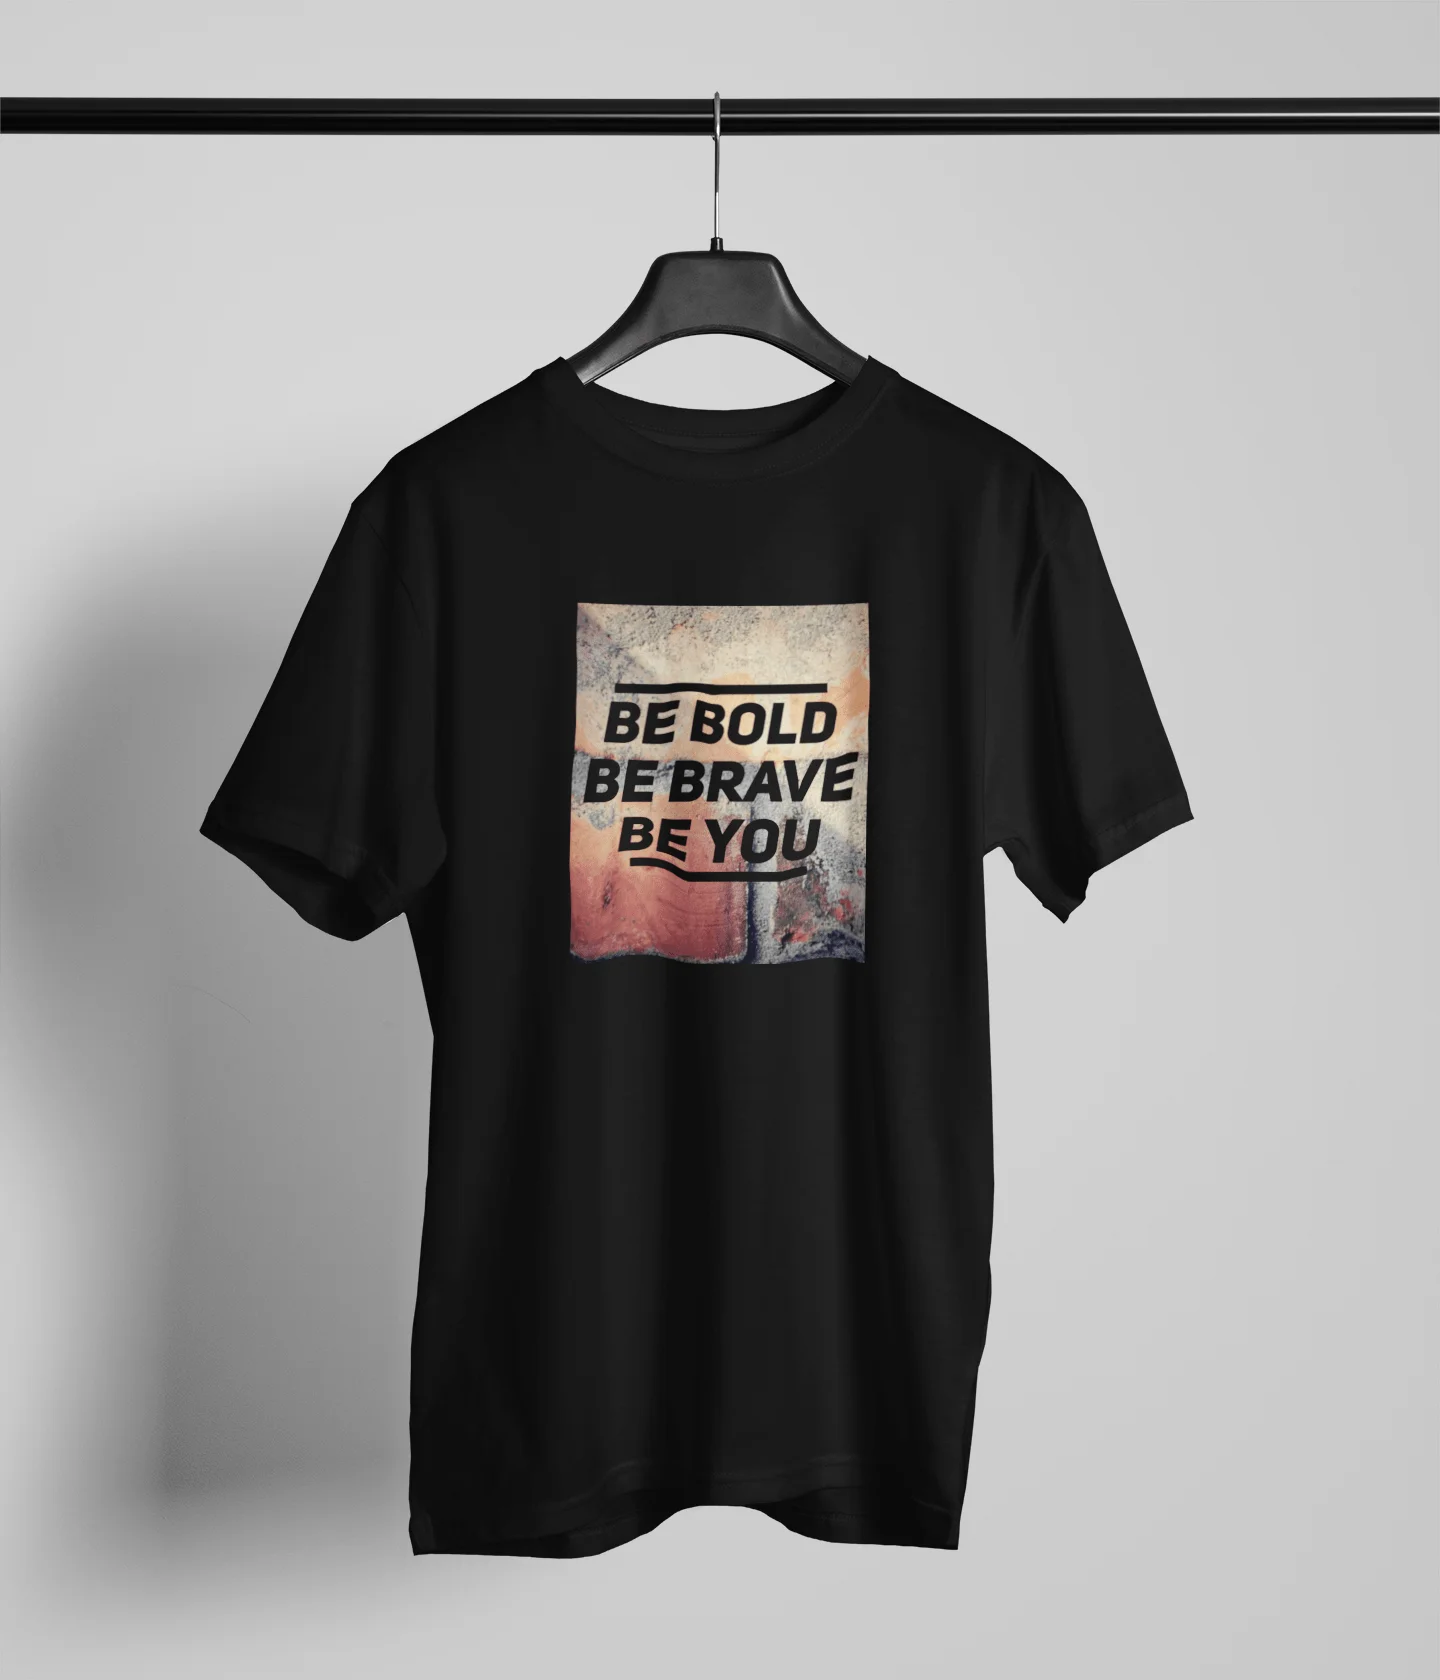 Dare to Be: Men's Tee – Be Bold, Be Brave, Be You